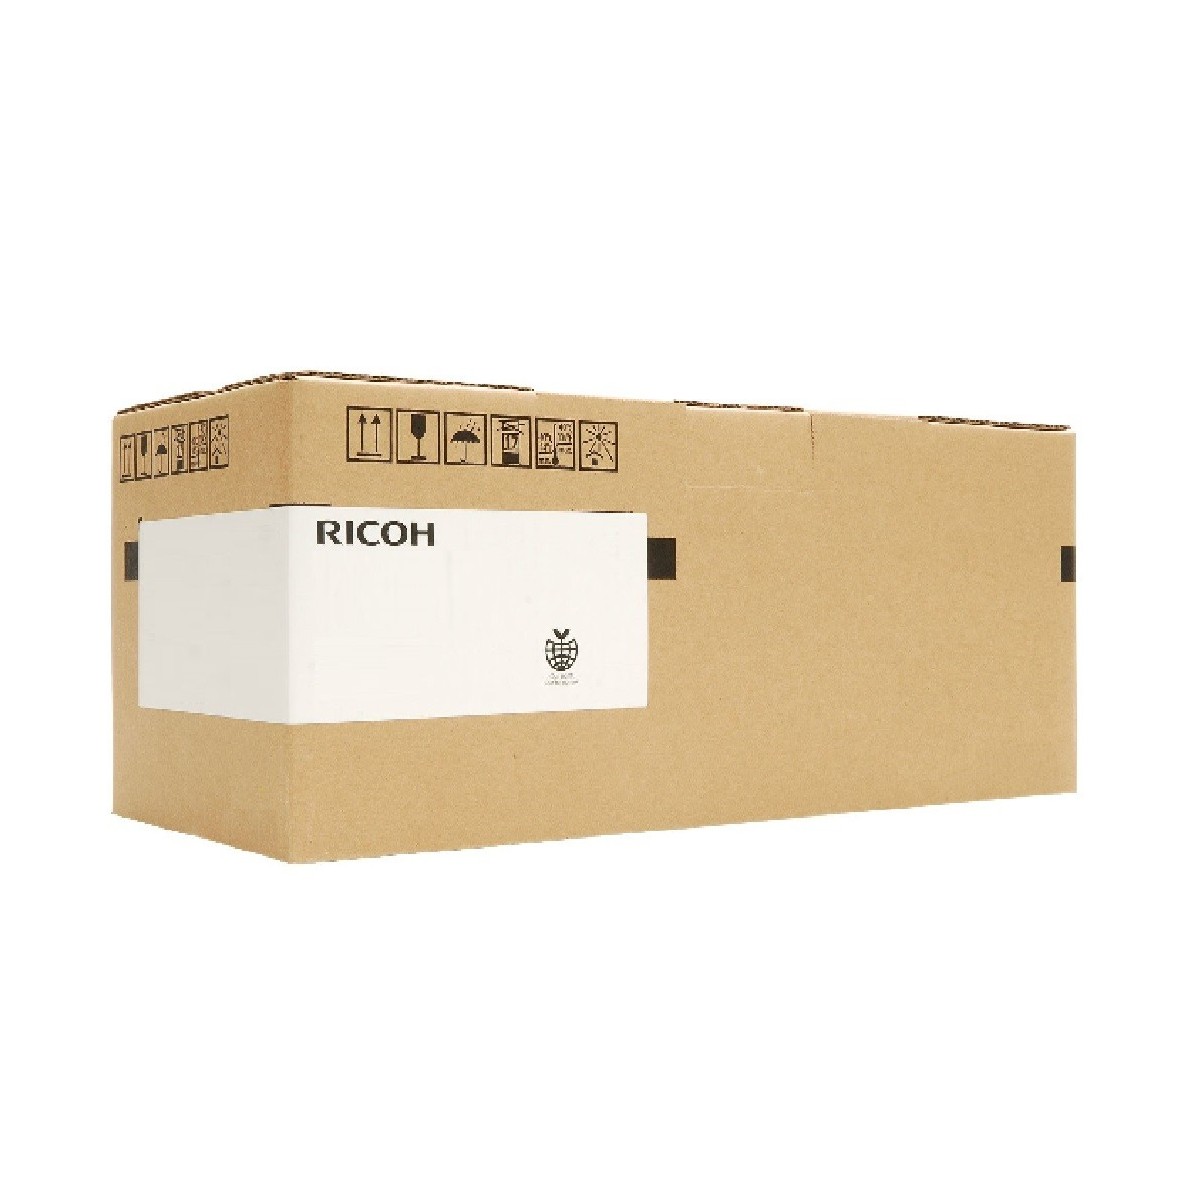 Ricoh D0819680 - 450000 pages - Yellow - Ricoh - MPC6001/6501/7501 - 650 g